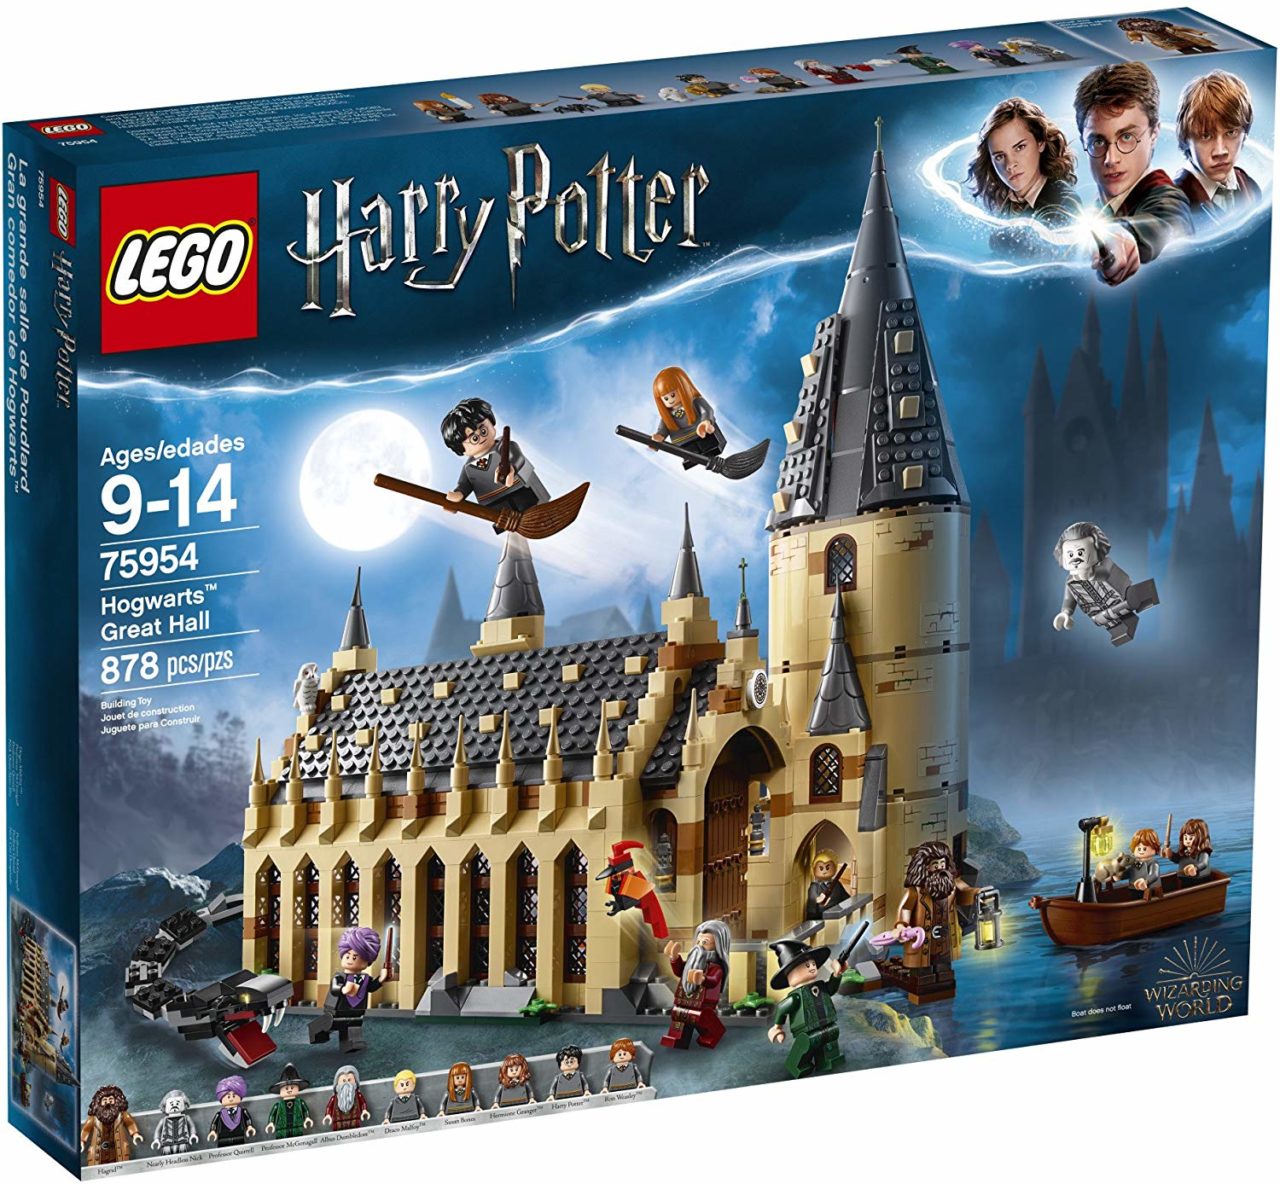 LEGO Harry Potter Sets Seeing 20% Off Discount - FBTB